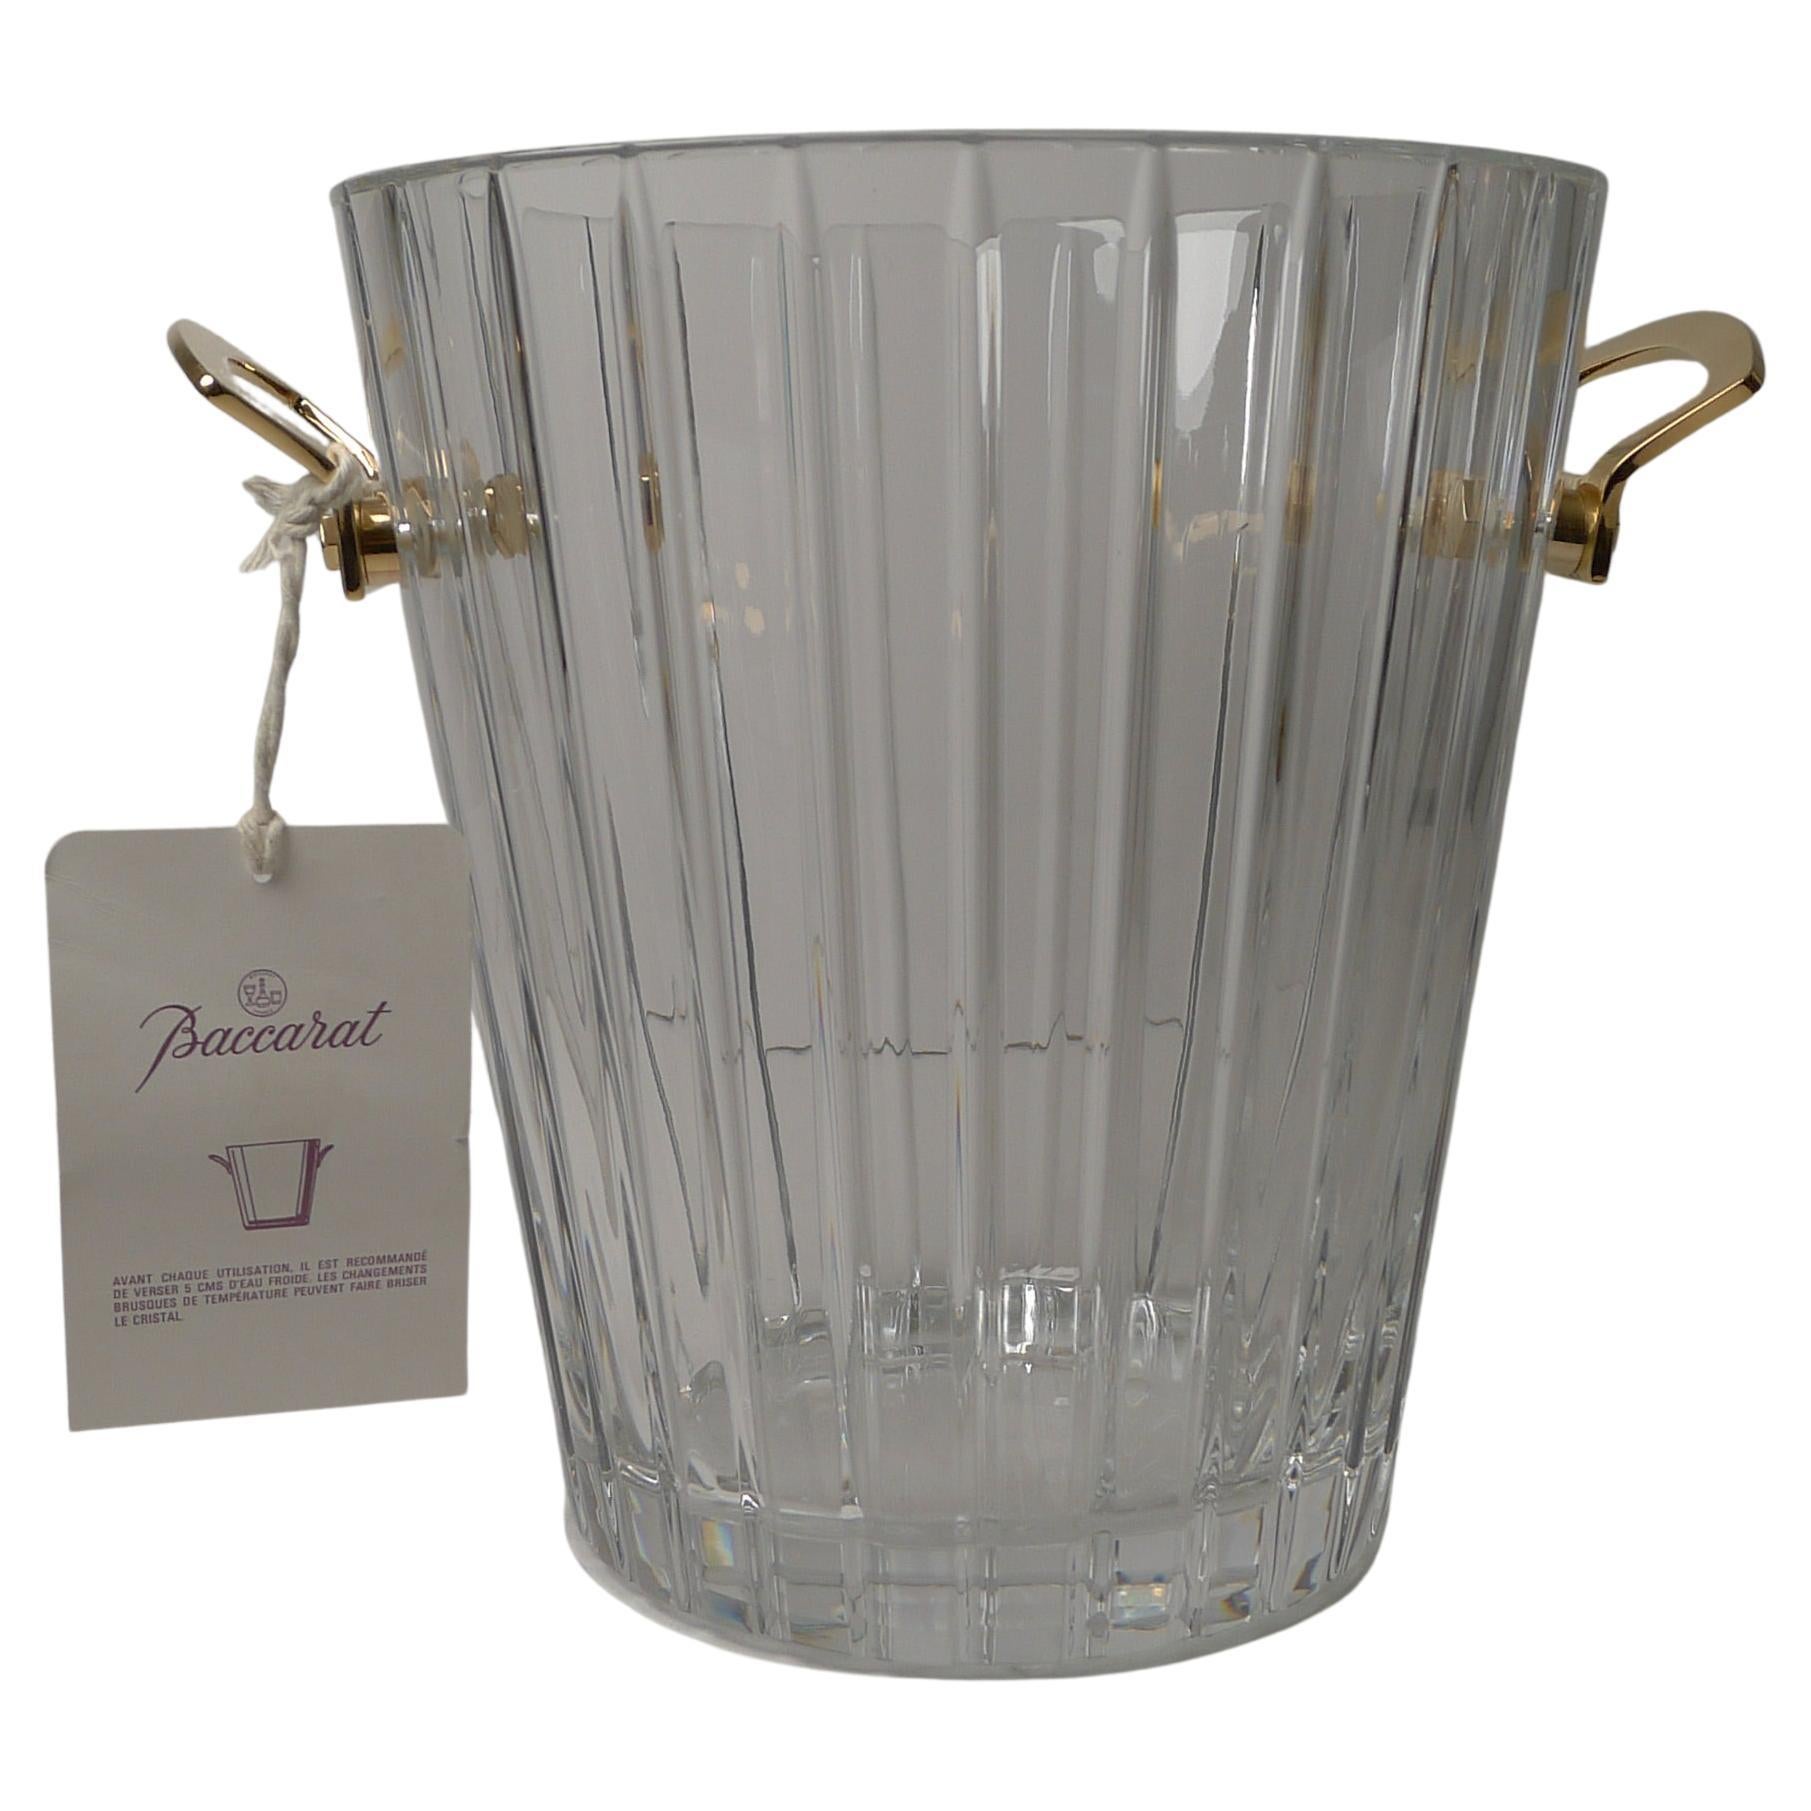 Baccarat "Harmonie" Champagne Bucket or Wine Cooler, circa 1980 For Sale